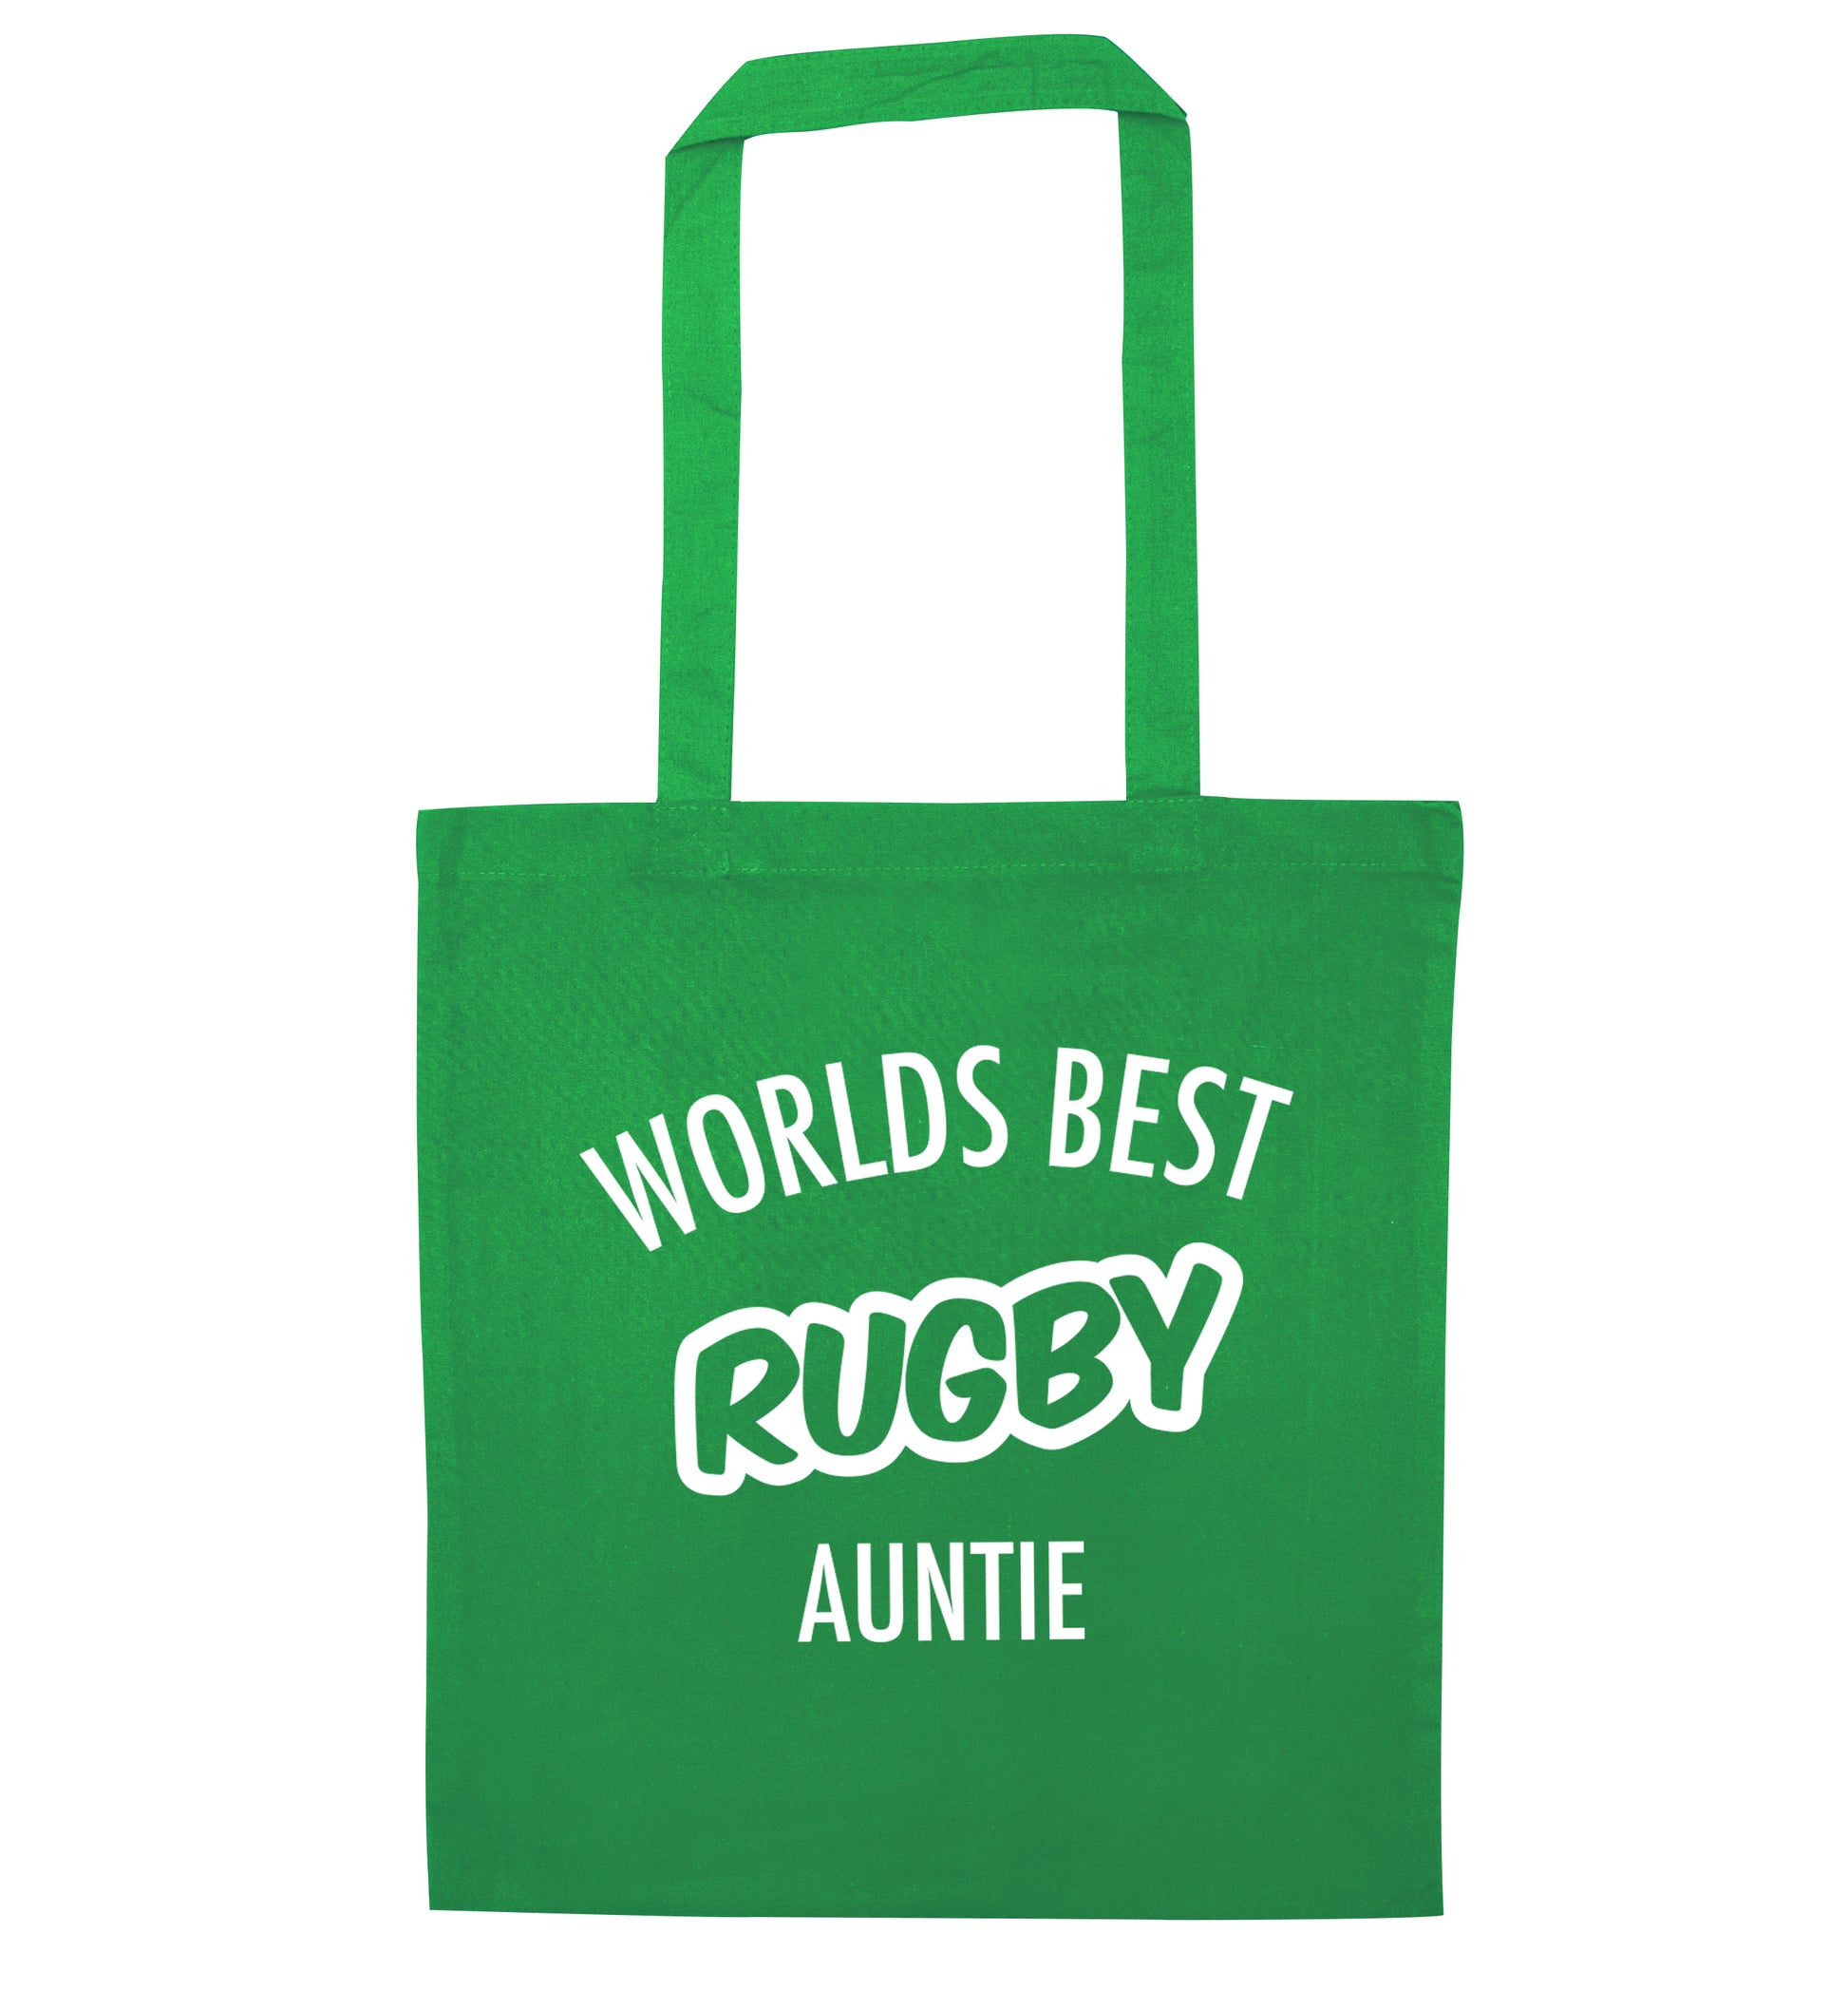 Worlds best rugby auntie green tote bag